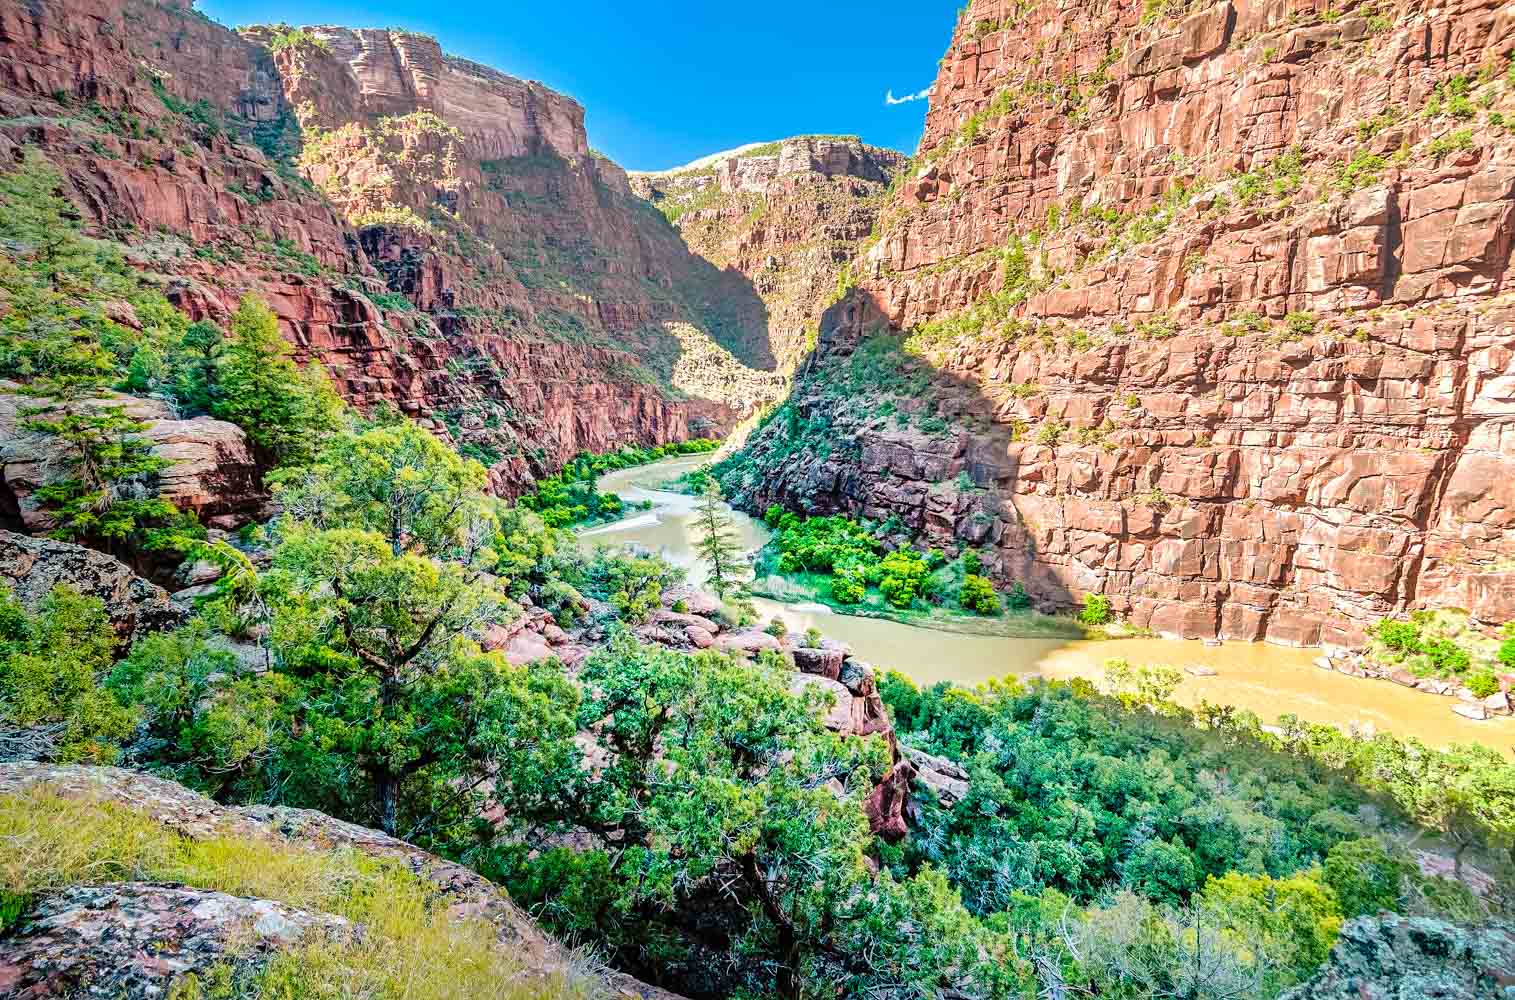 The Best Family Rafting Trips in the West